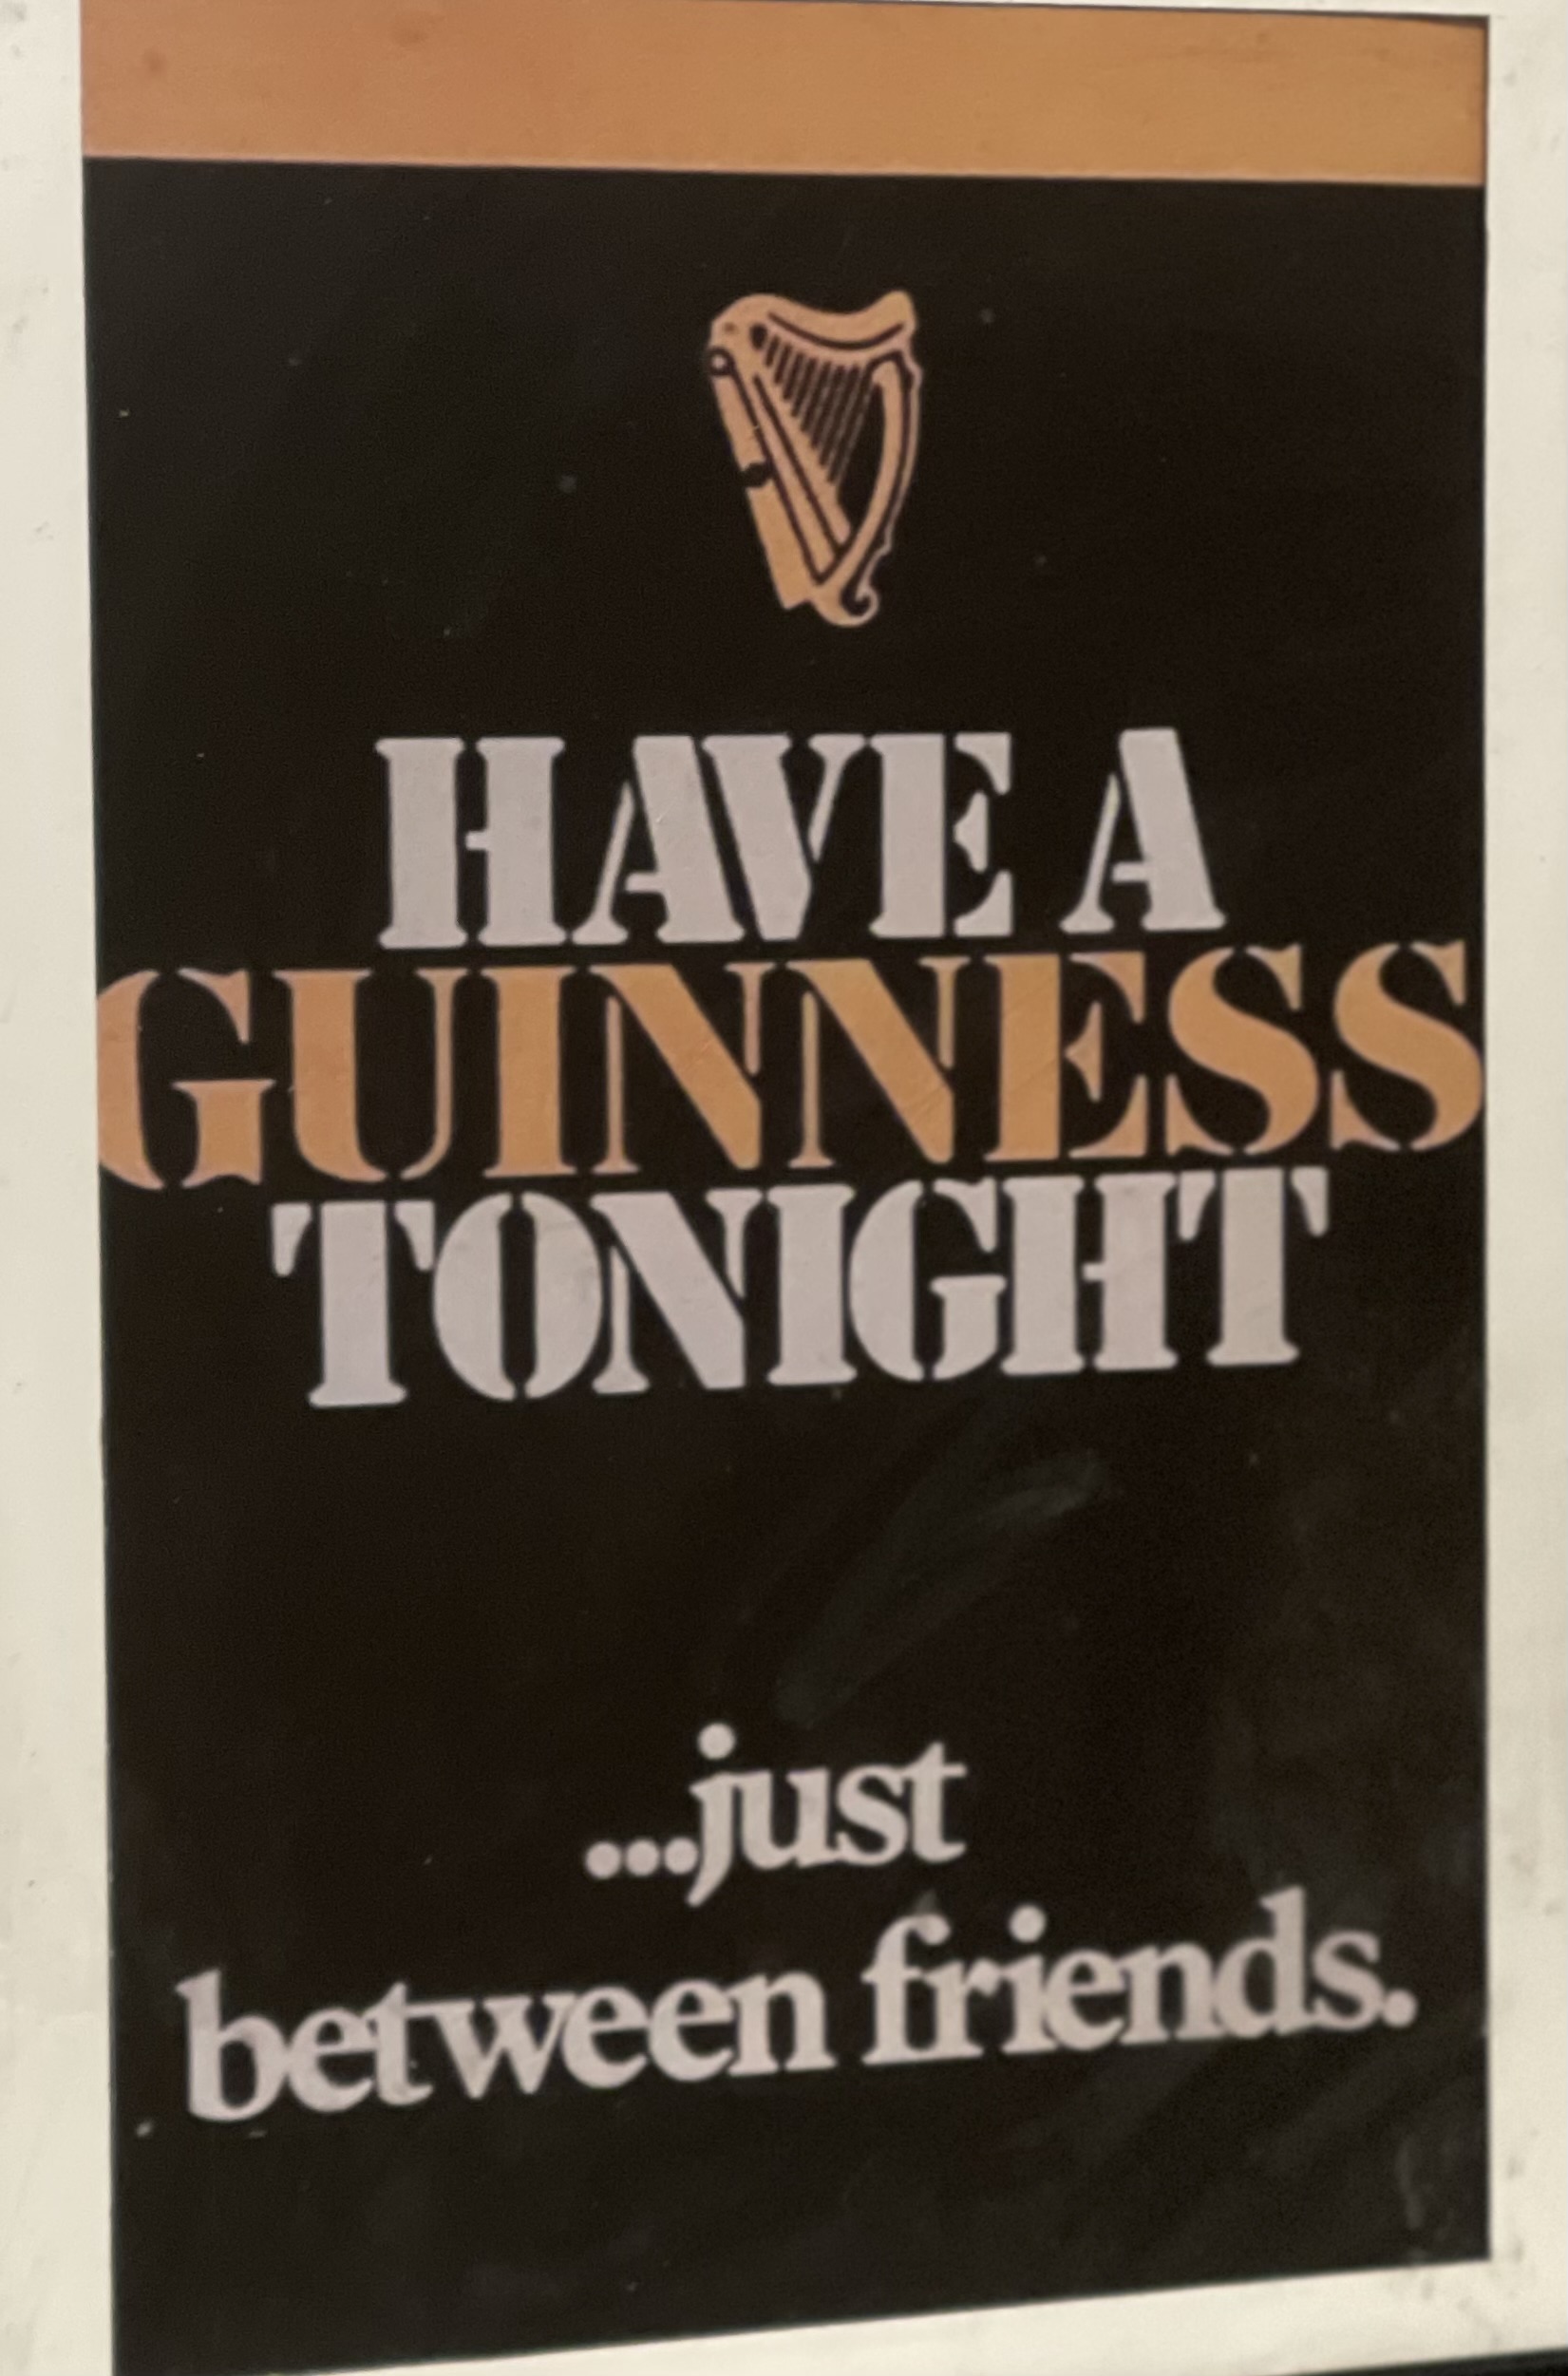 Retro Have a Guinness Tonight…..just between friends Advert - The